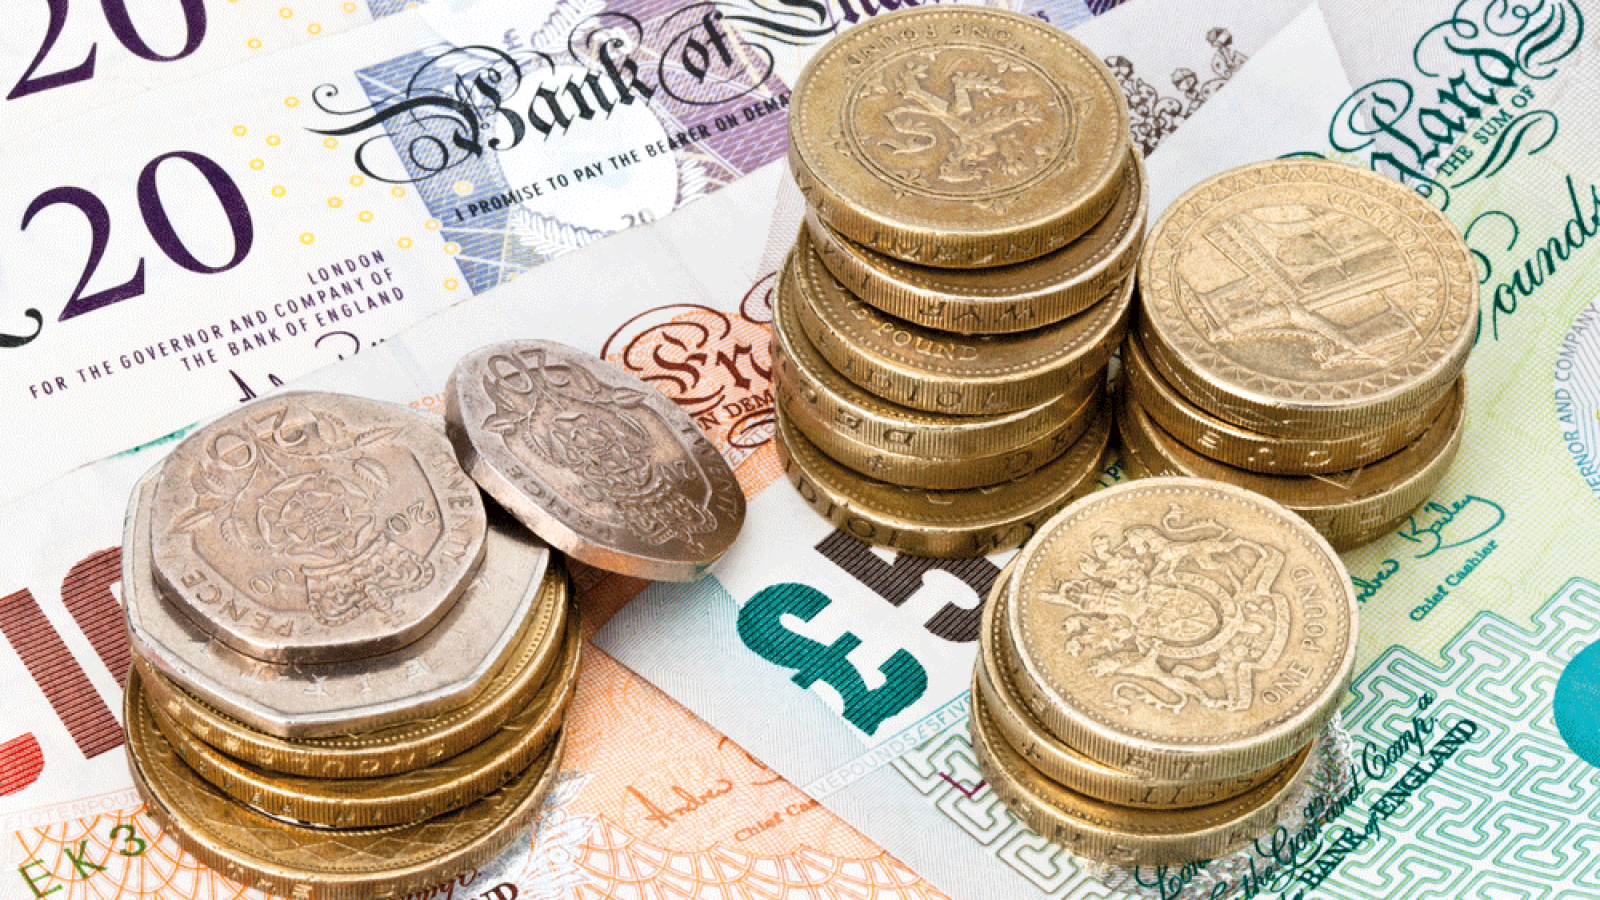 Pound Sterling Push To End Low Pay